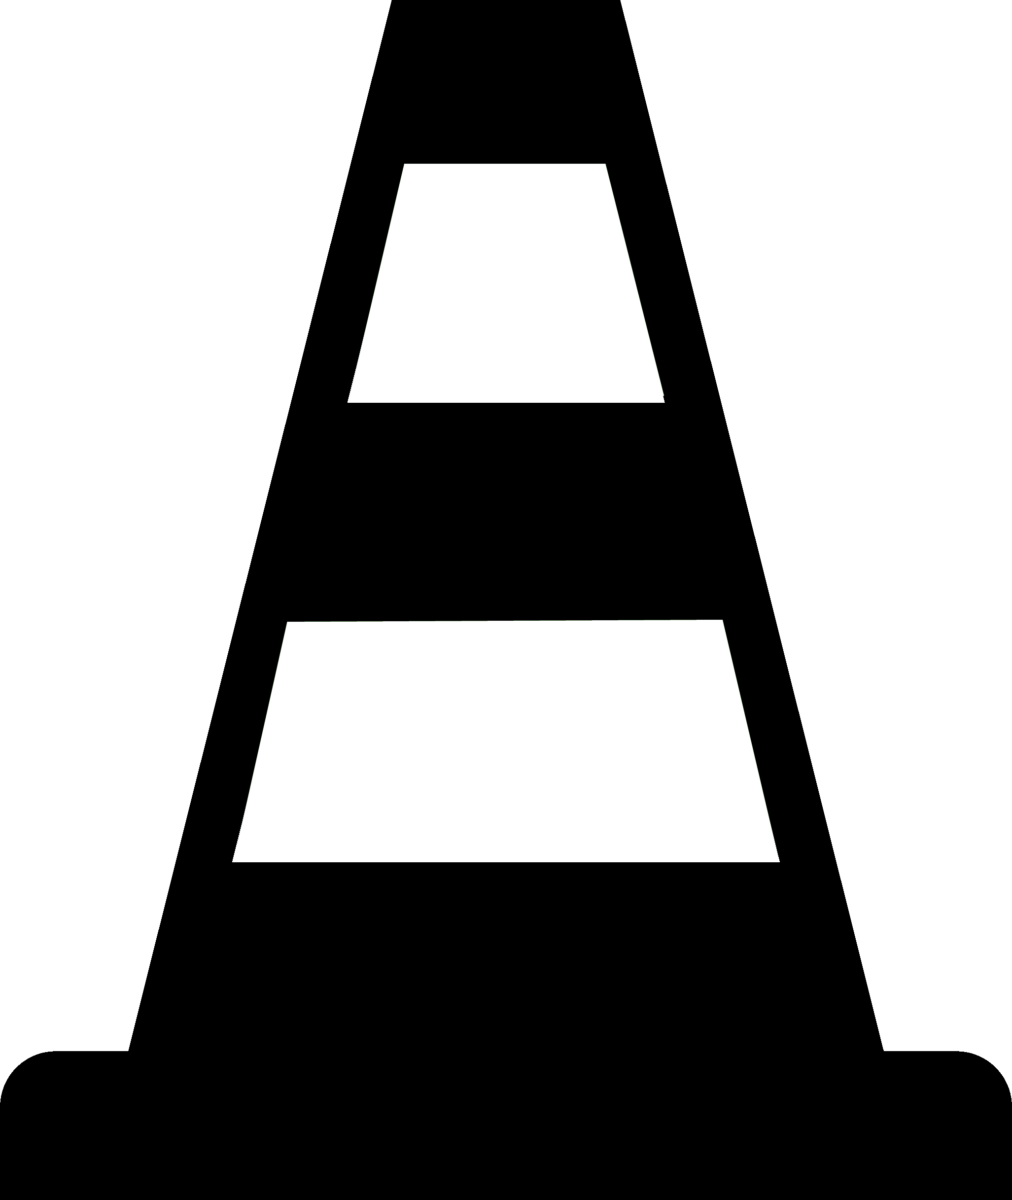 Black and white safety cone icon